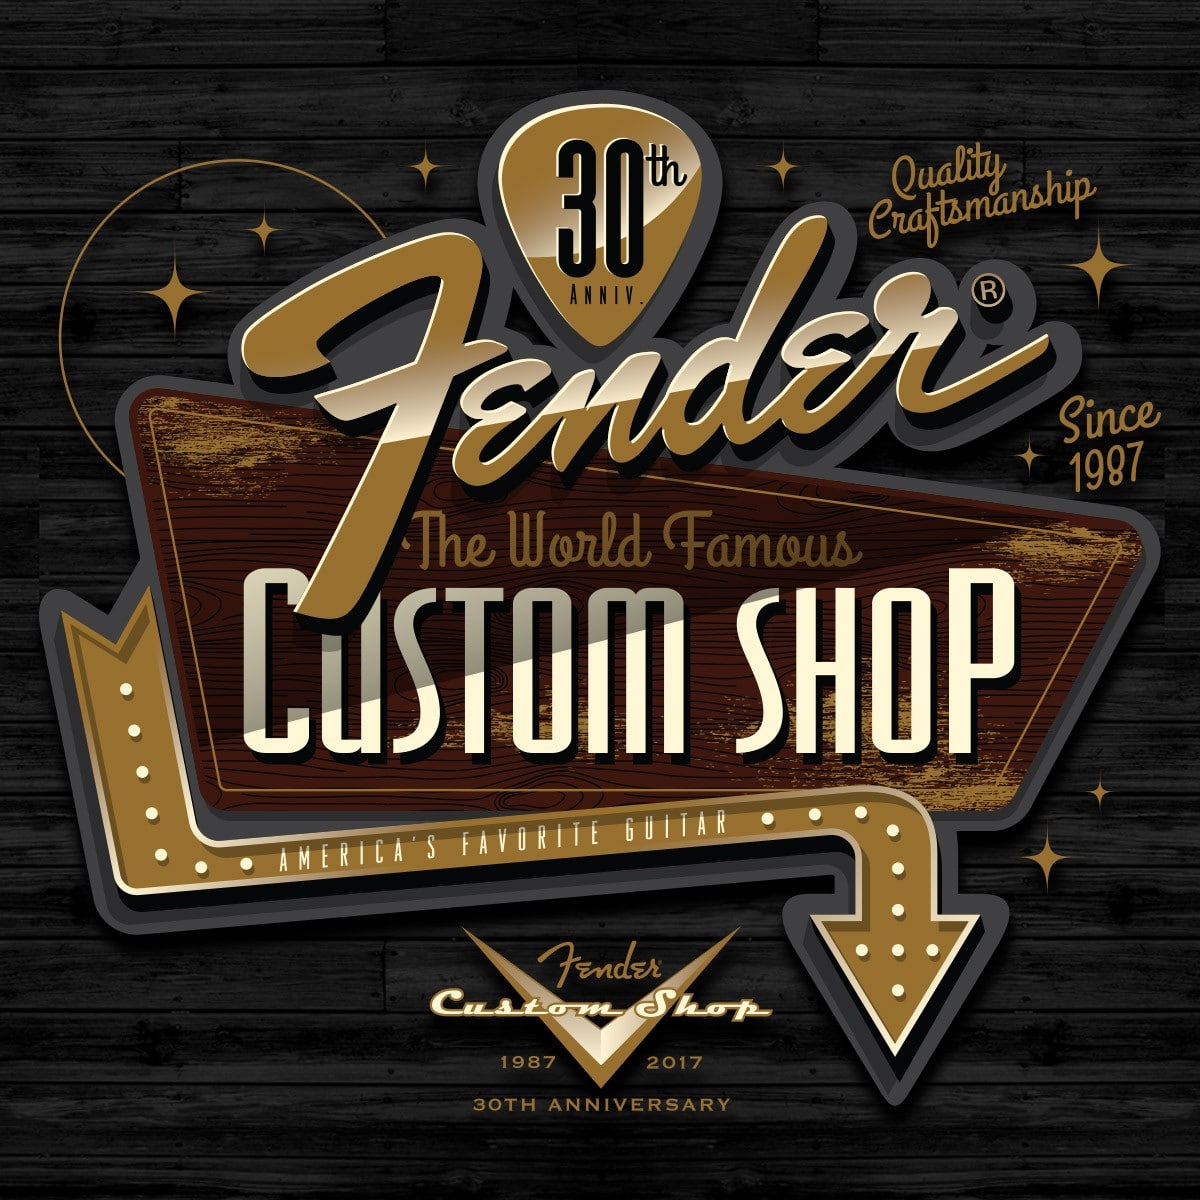 Collaboration design for Fender x To Die For. Design was for Fender's Custom Shop tees worn at NAMM